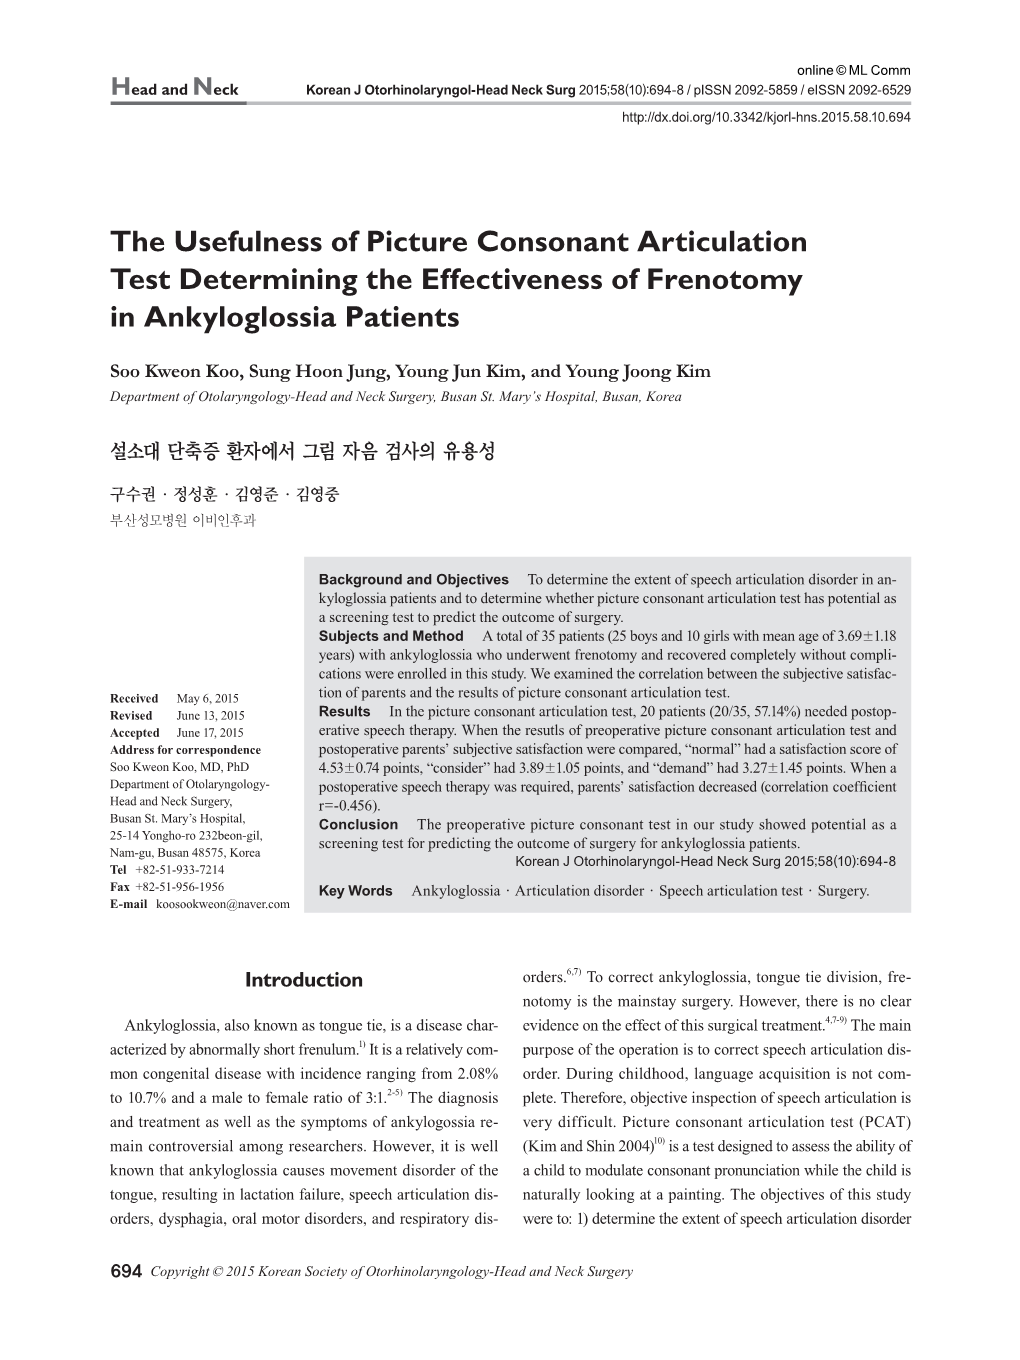 The Usefulness of Picture Consonant Articulation Test Determining the Effectiveness of Frenotomy in Ankyloglossia Patients